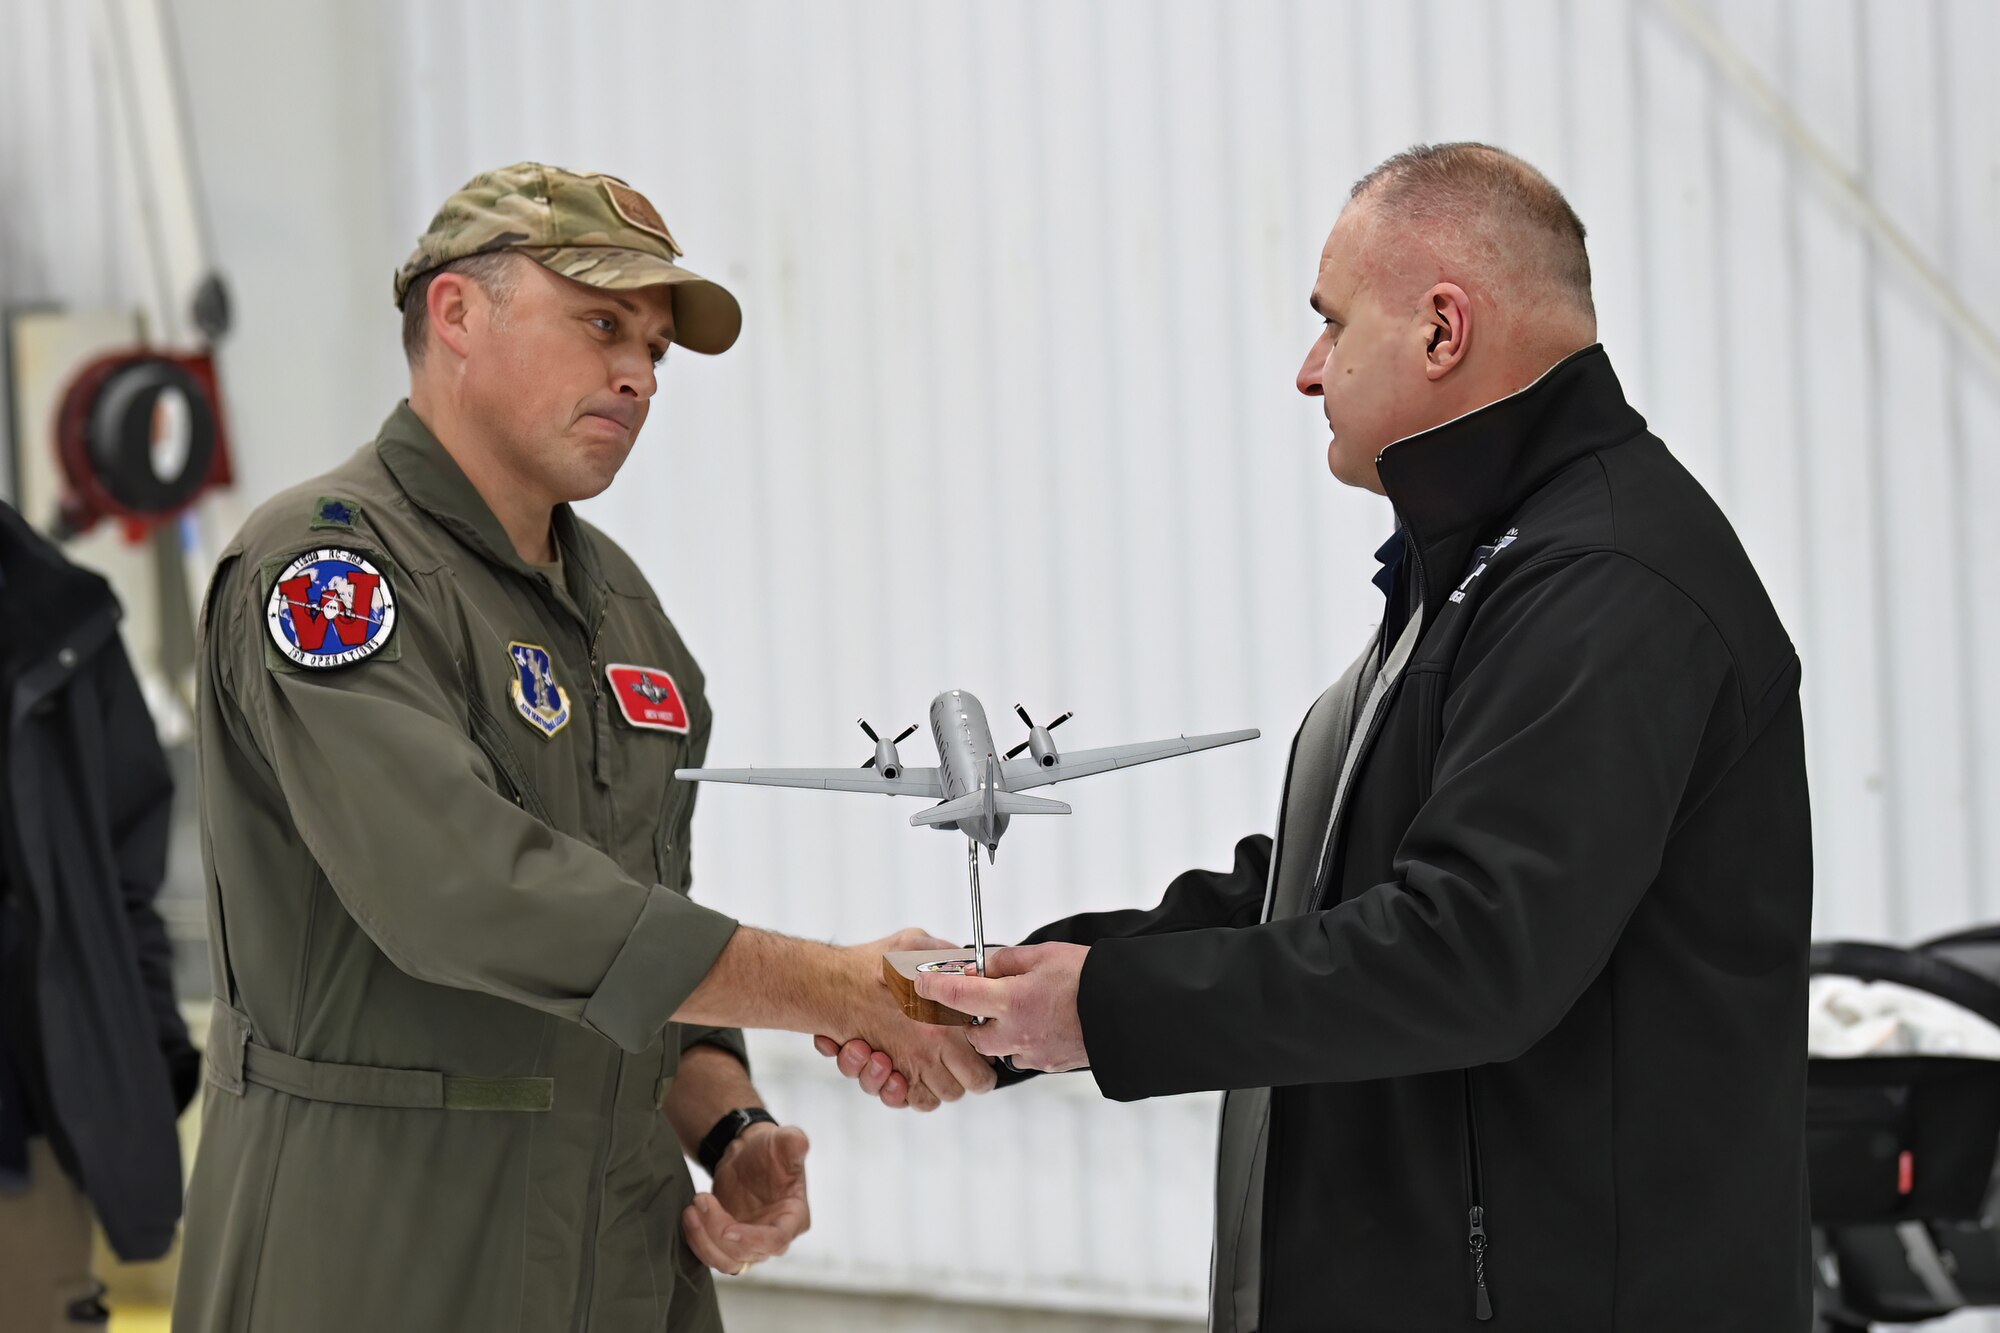 U.S. Army Col. Paul Felician, director of the Wisconsin National Guard's Counter Drug Program, right, recognizes Lt. Col. Benjamin West, Wisconsin RC-26 program manager, following the final flight of the state's RC-26B reconnaissance aircraft Dec. 28, 2022.